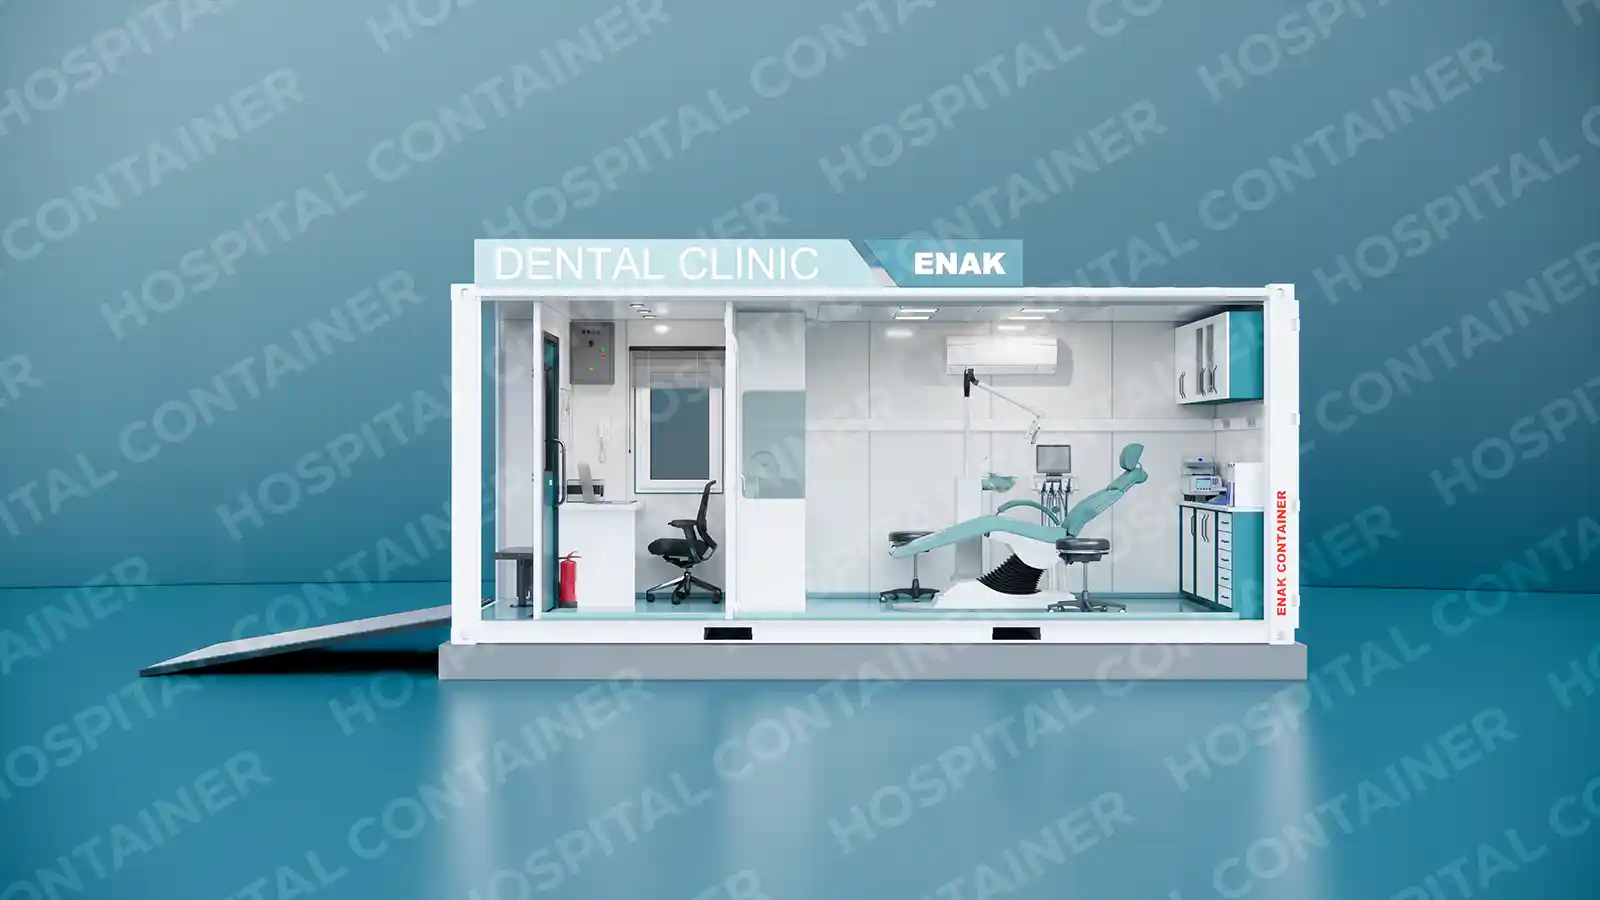 Container Healthcare Units Redefining Medical Services